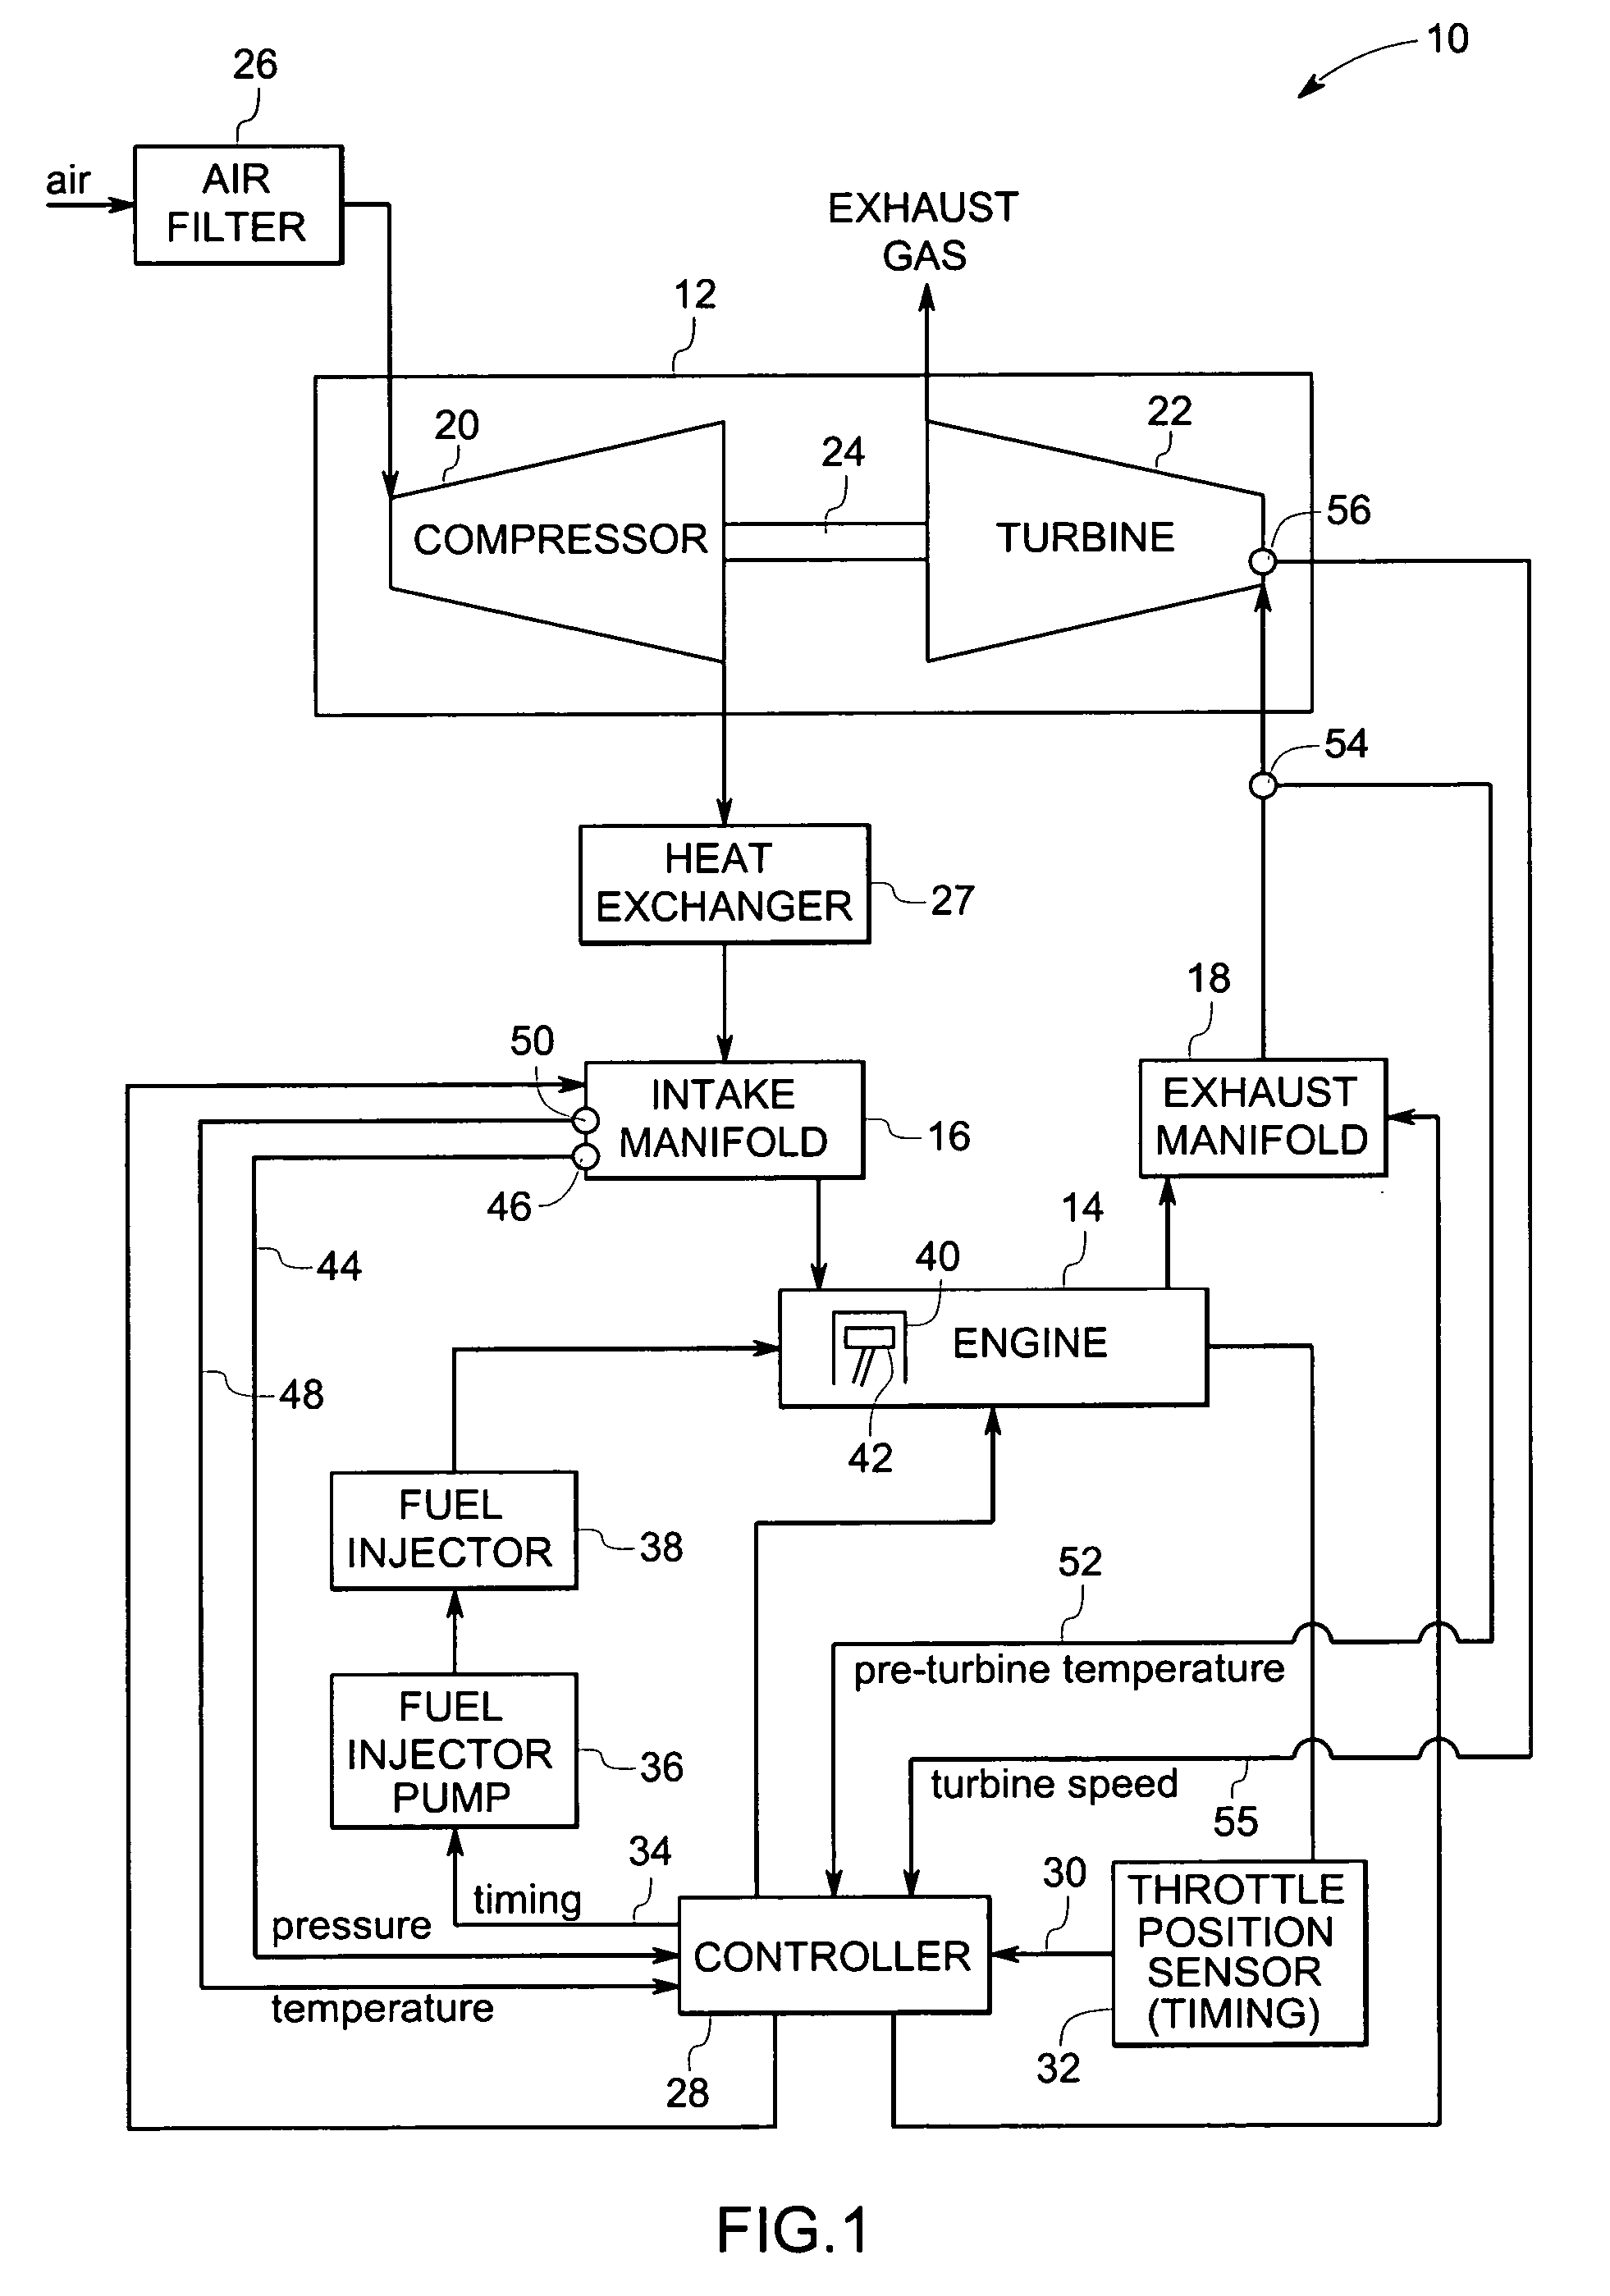 System and method for operating a compression-ignition engine